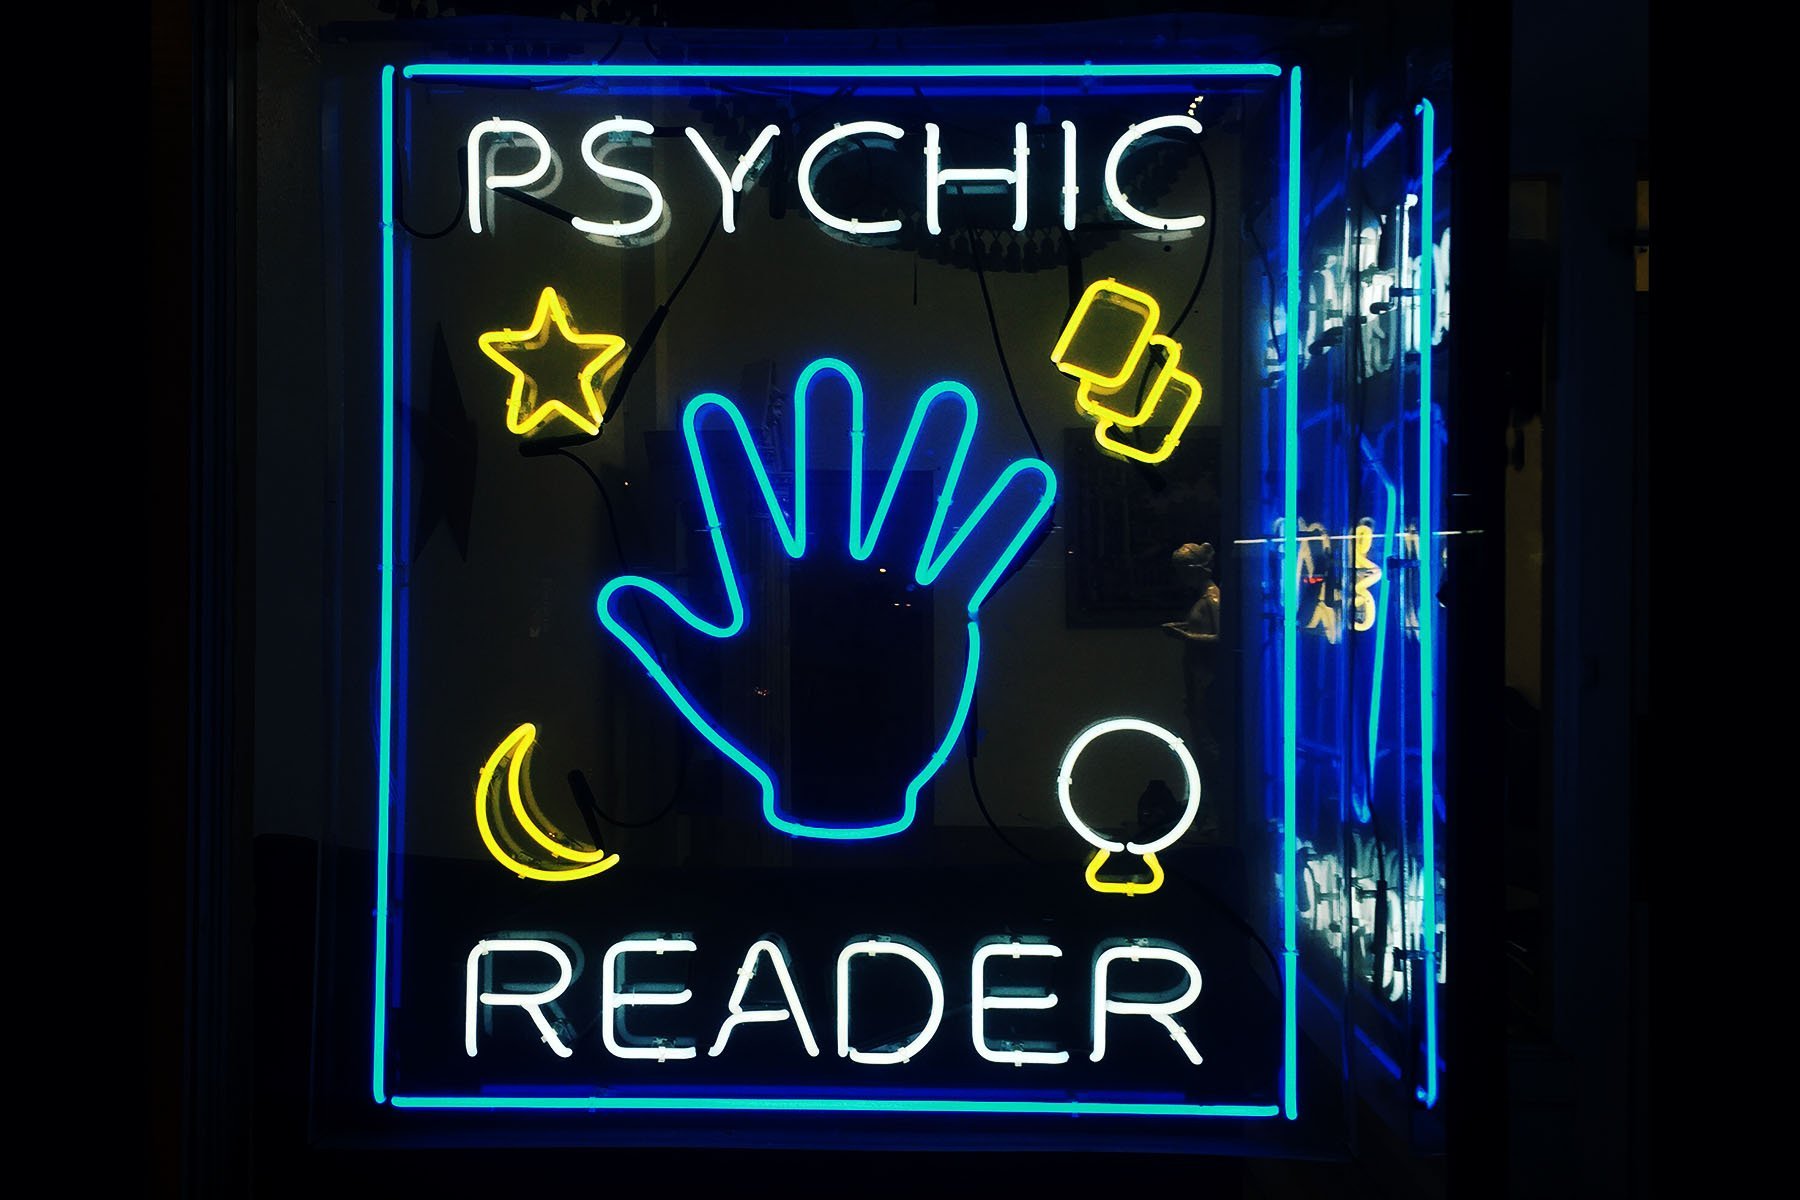 6 Things You Should Never Do at a Psychic Reading